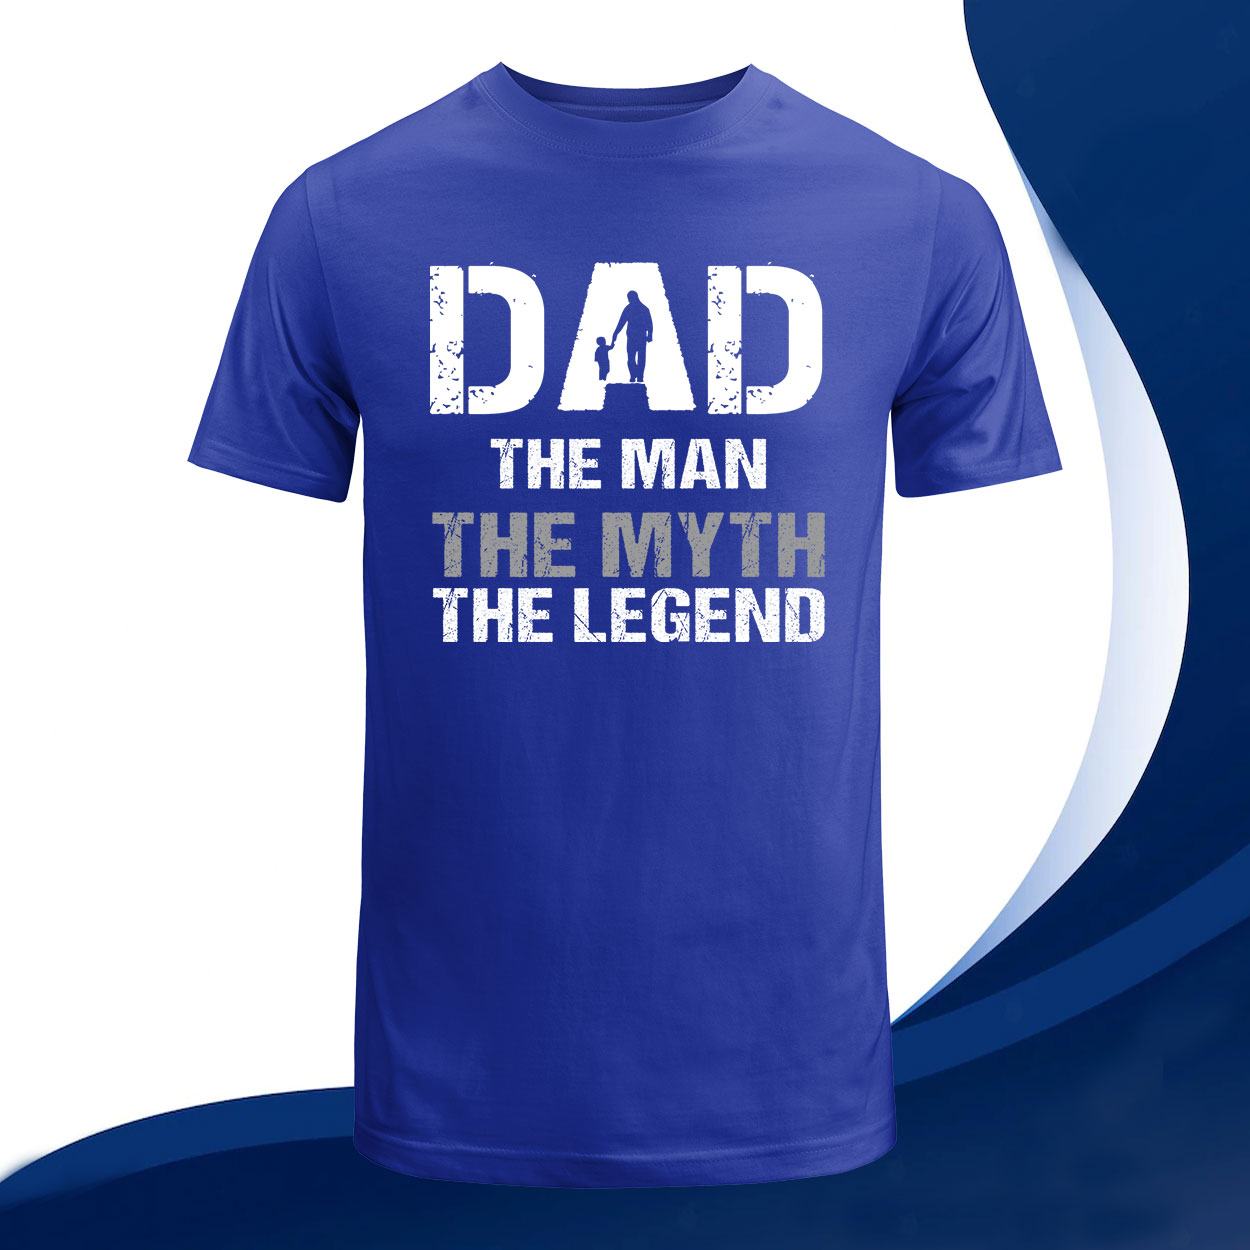 Dad The Man The Myth The Legend T-Shirt, Fathers Day Gift Tee Shirt ...